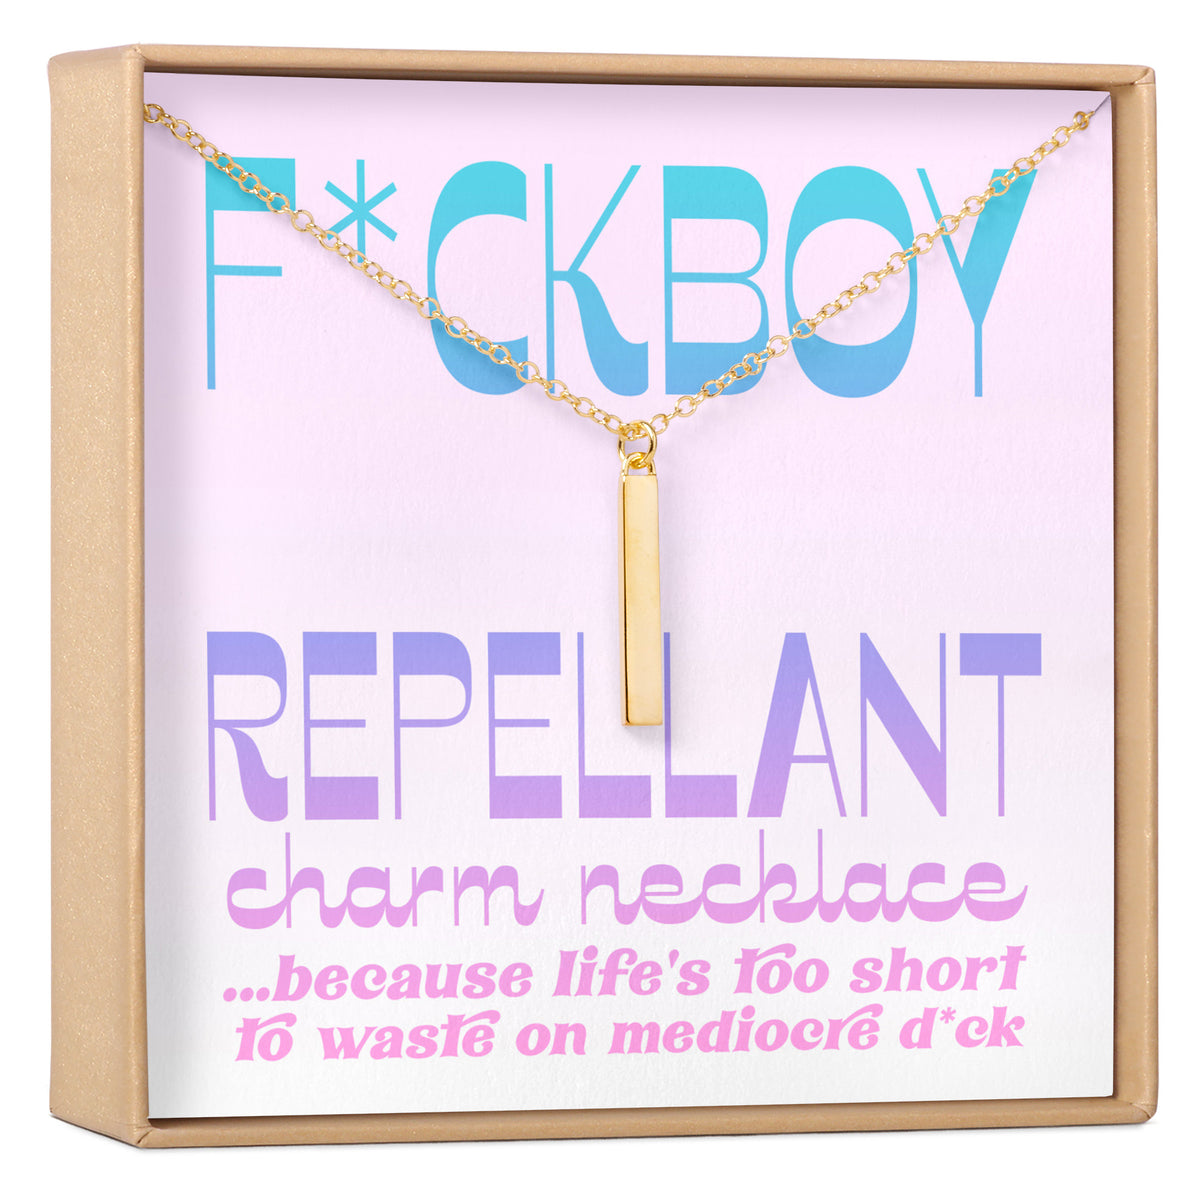 Fuckboy Repellant Necklace, Multiple Style Necklace